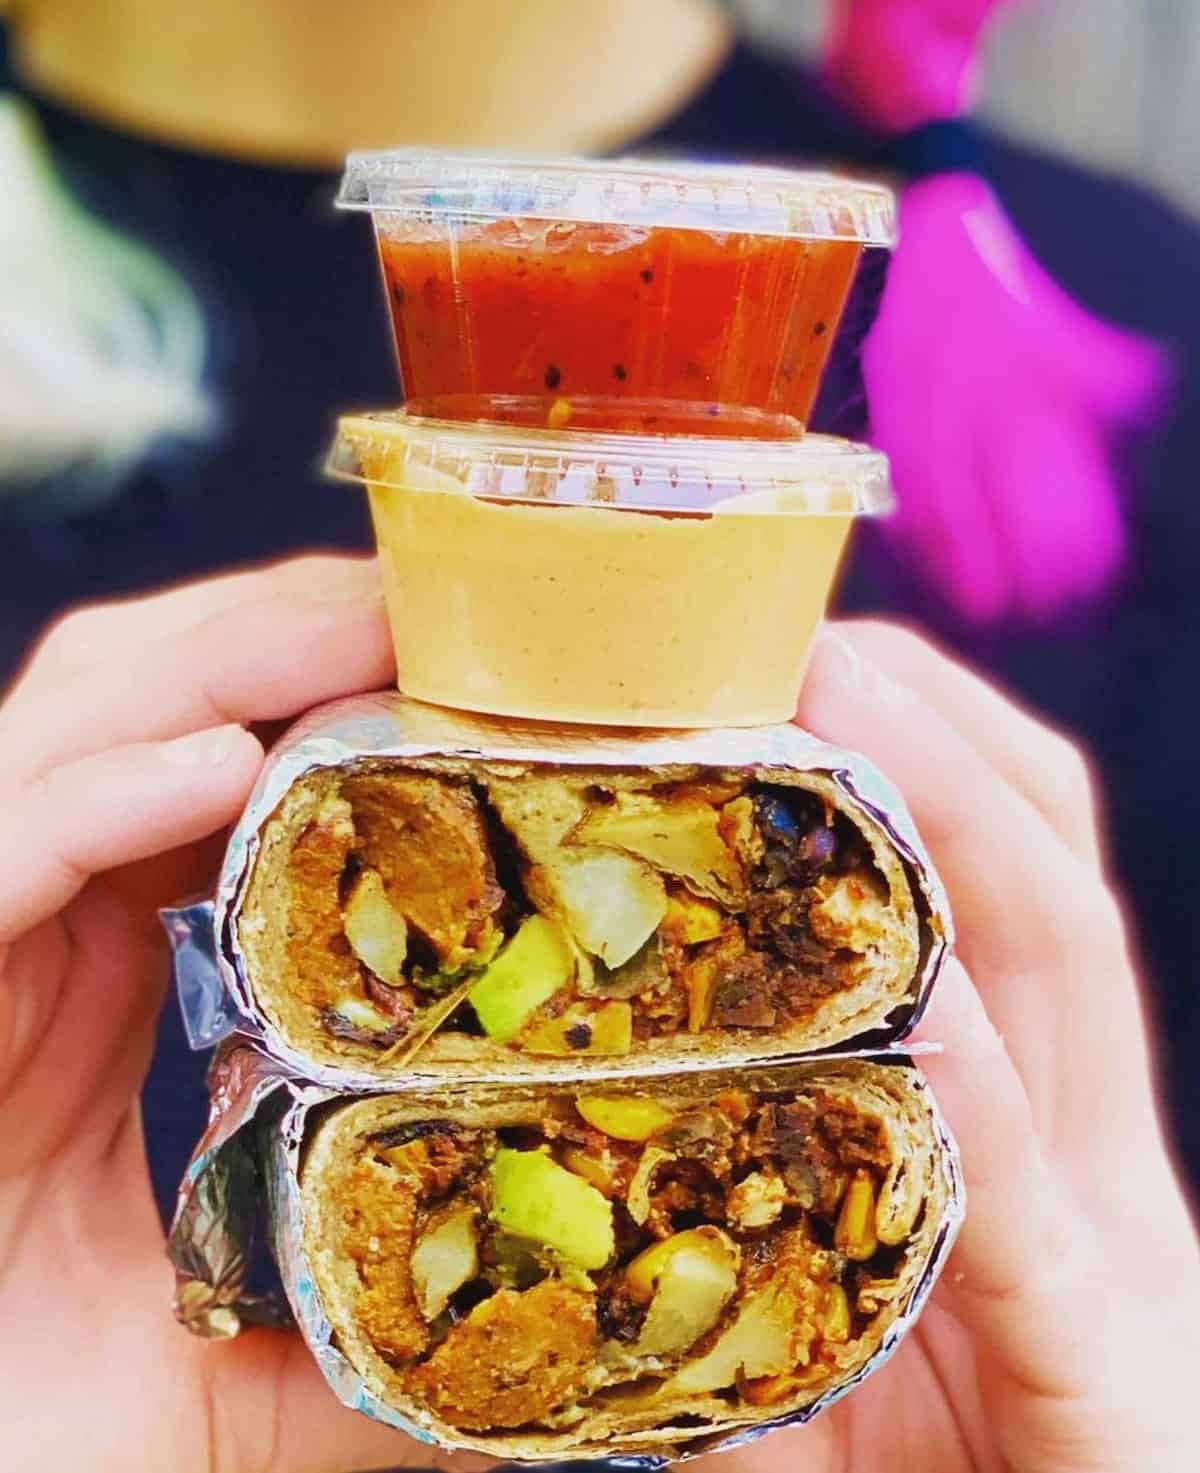 A vegan breakfast burrito with sauces from Counter Culture.